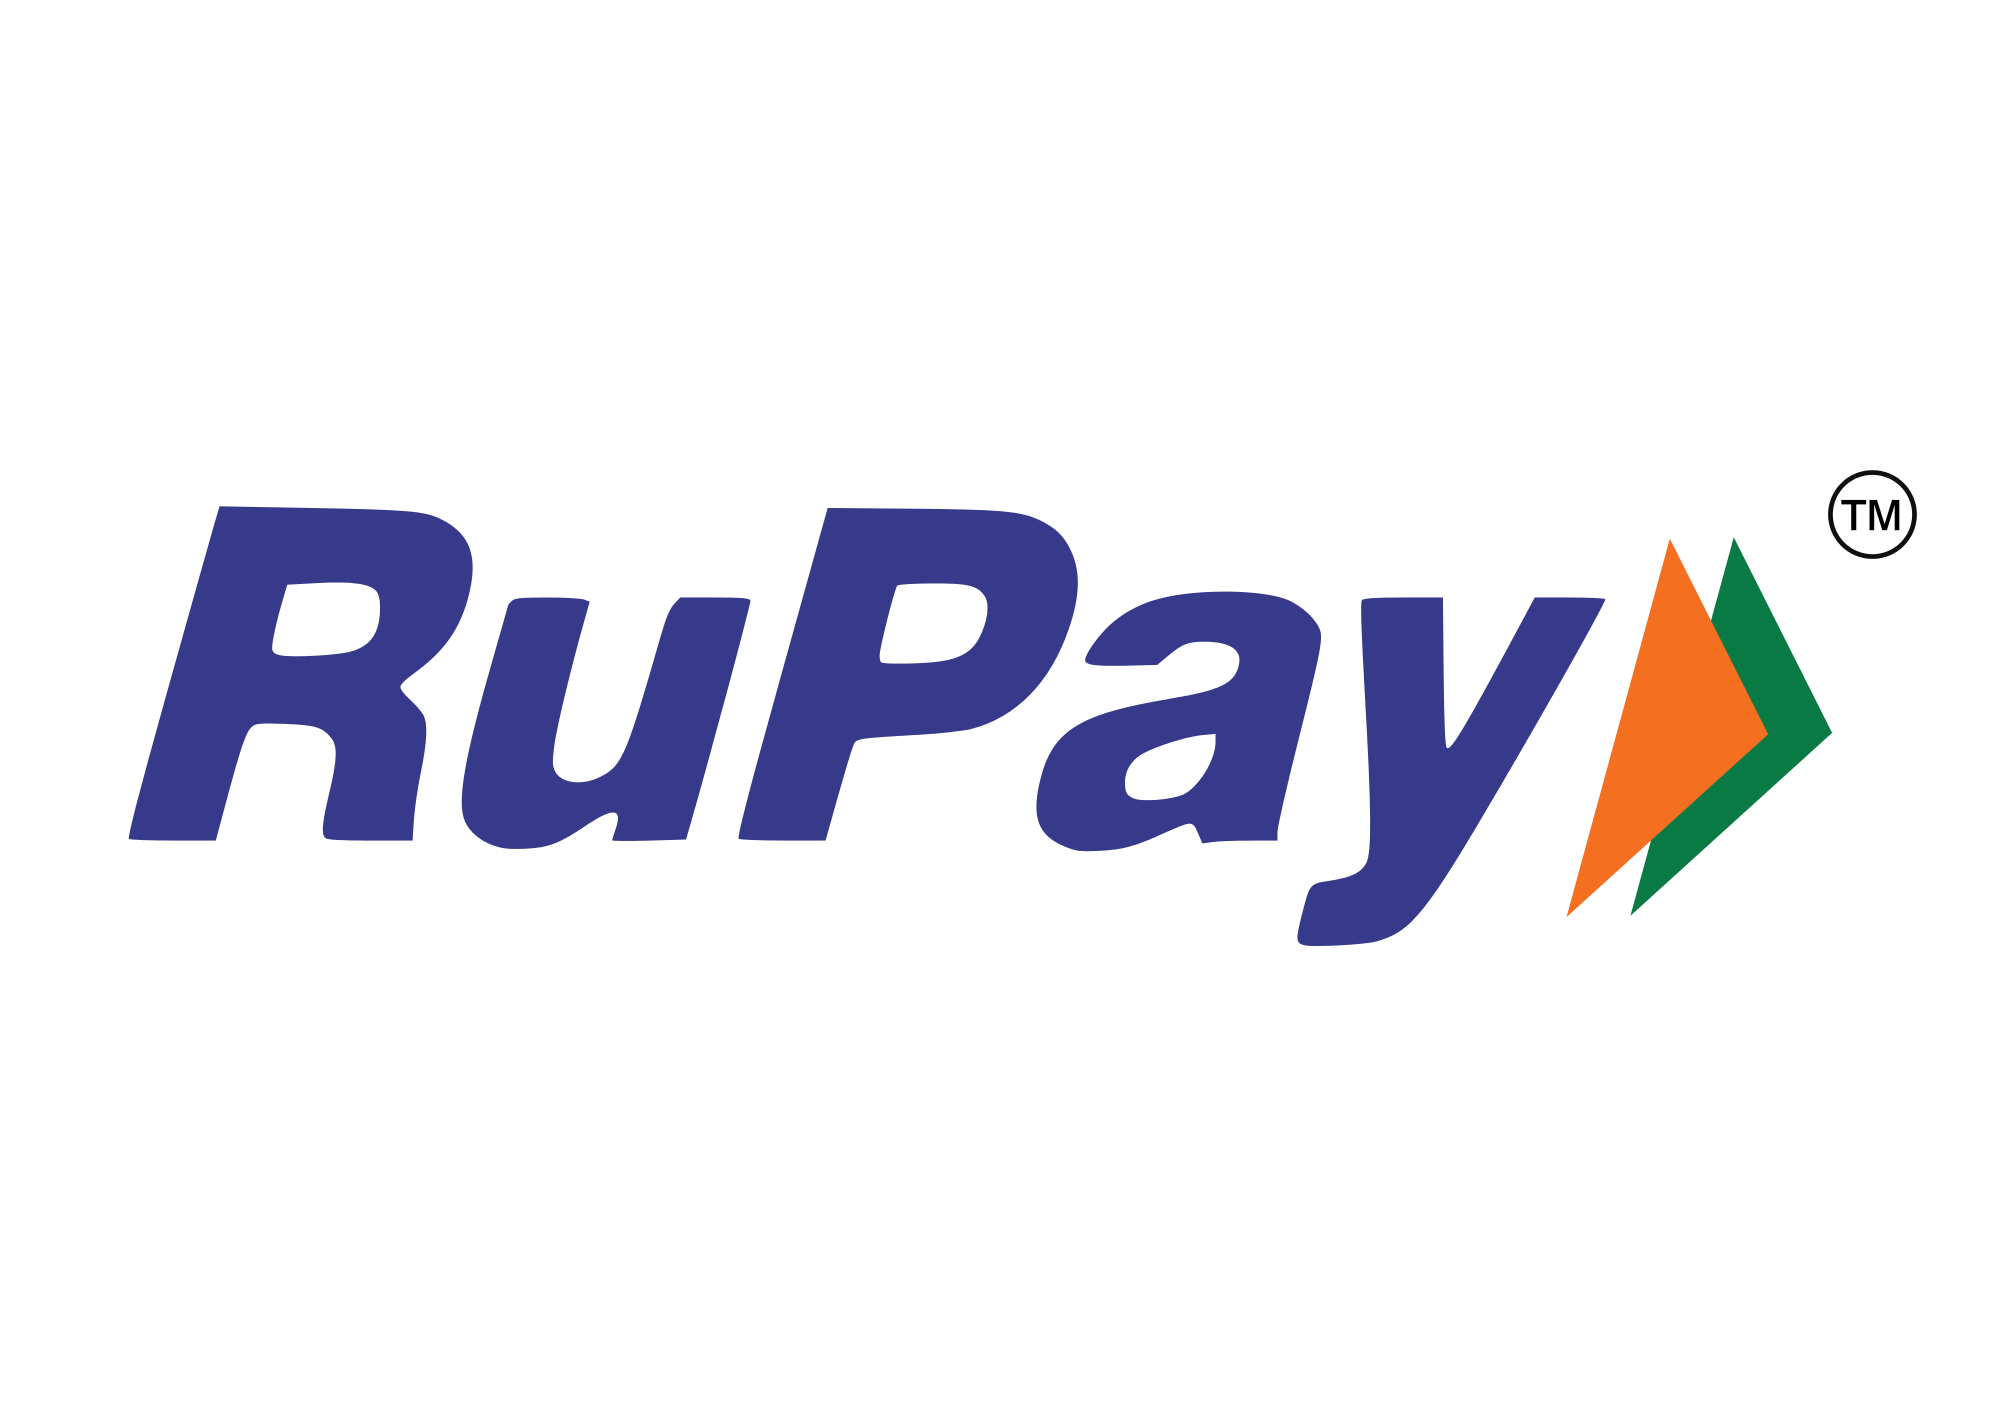 IRCTC, SBI Card launch co-branded RuPay credit card